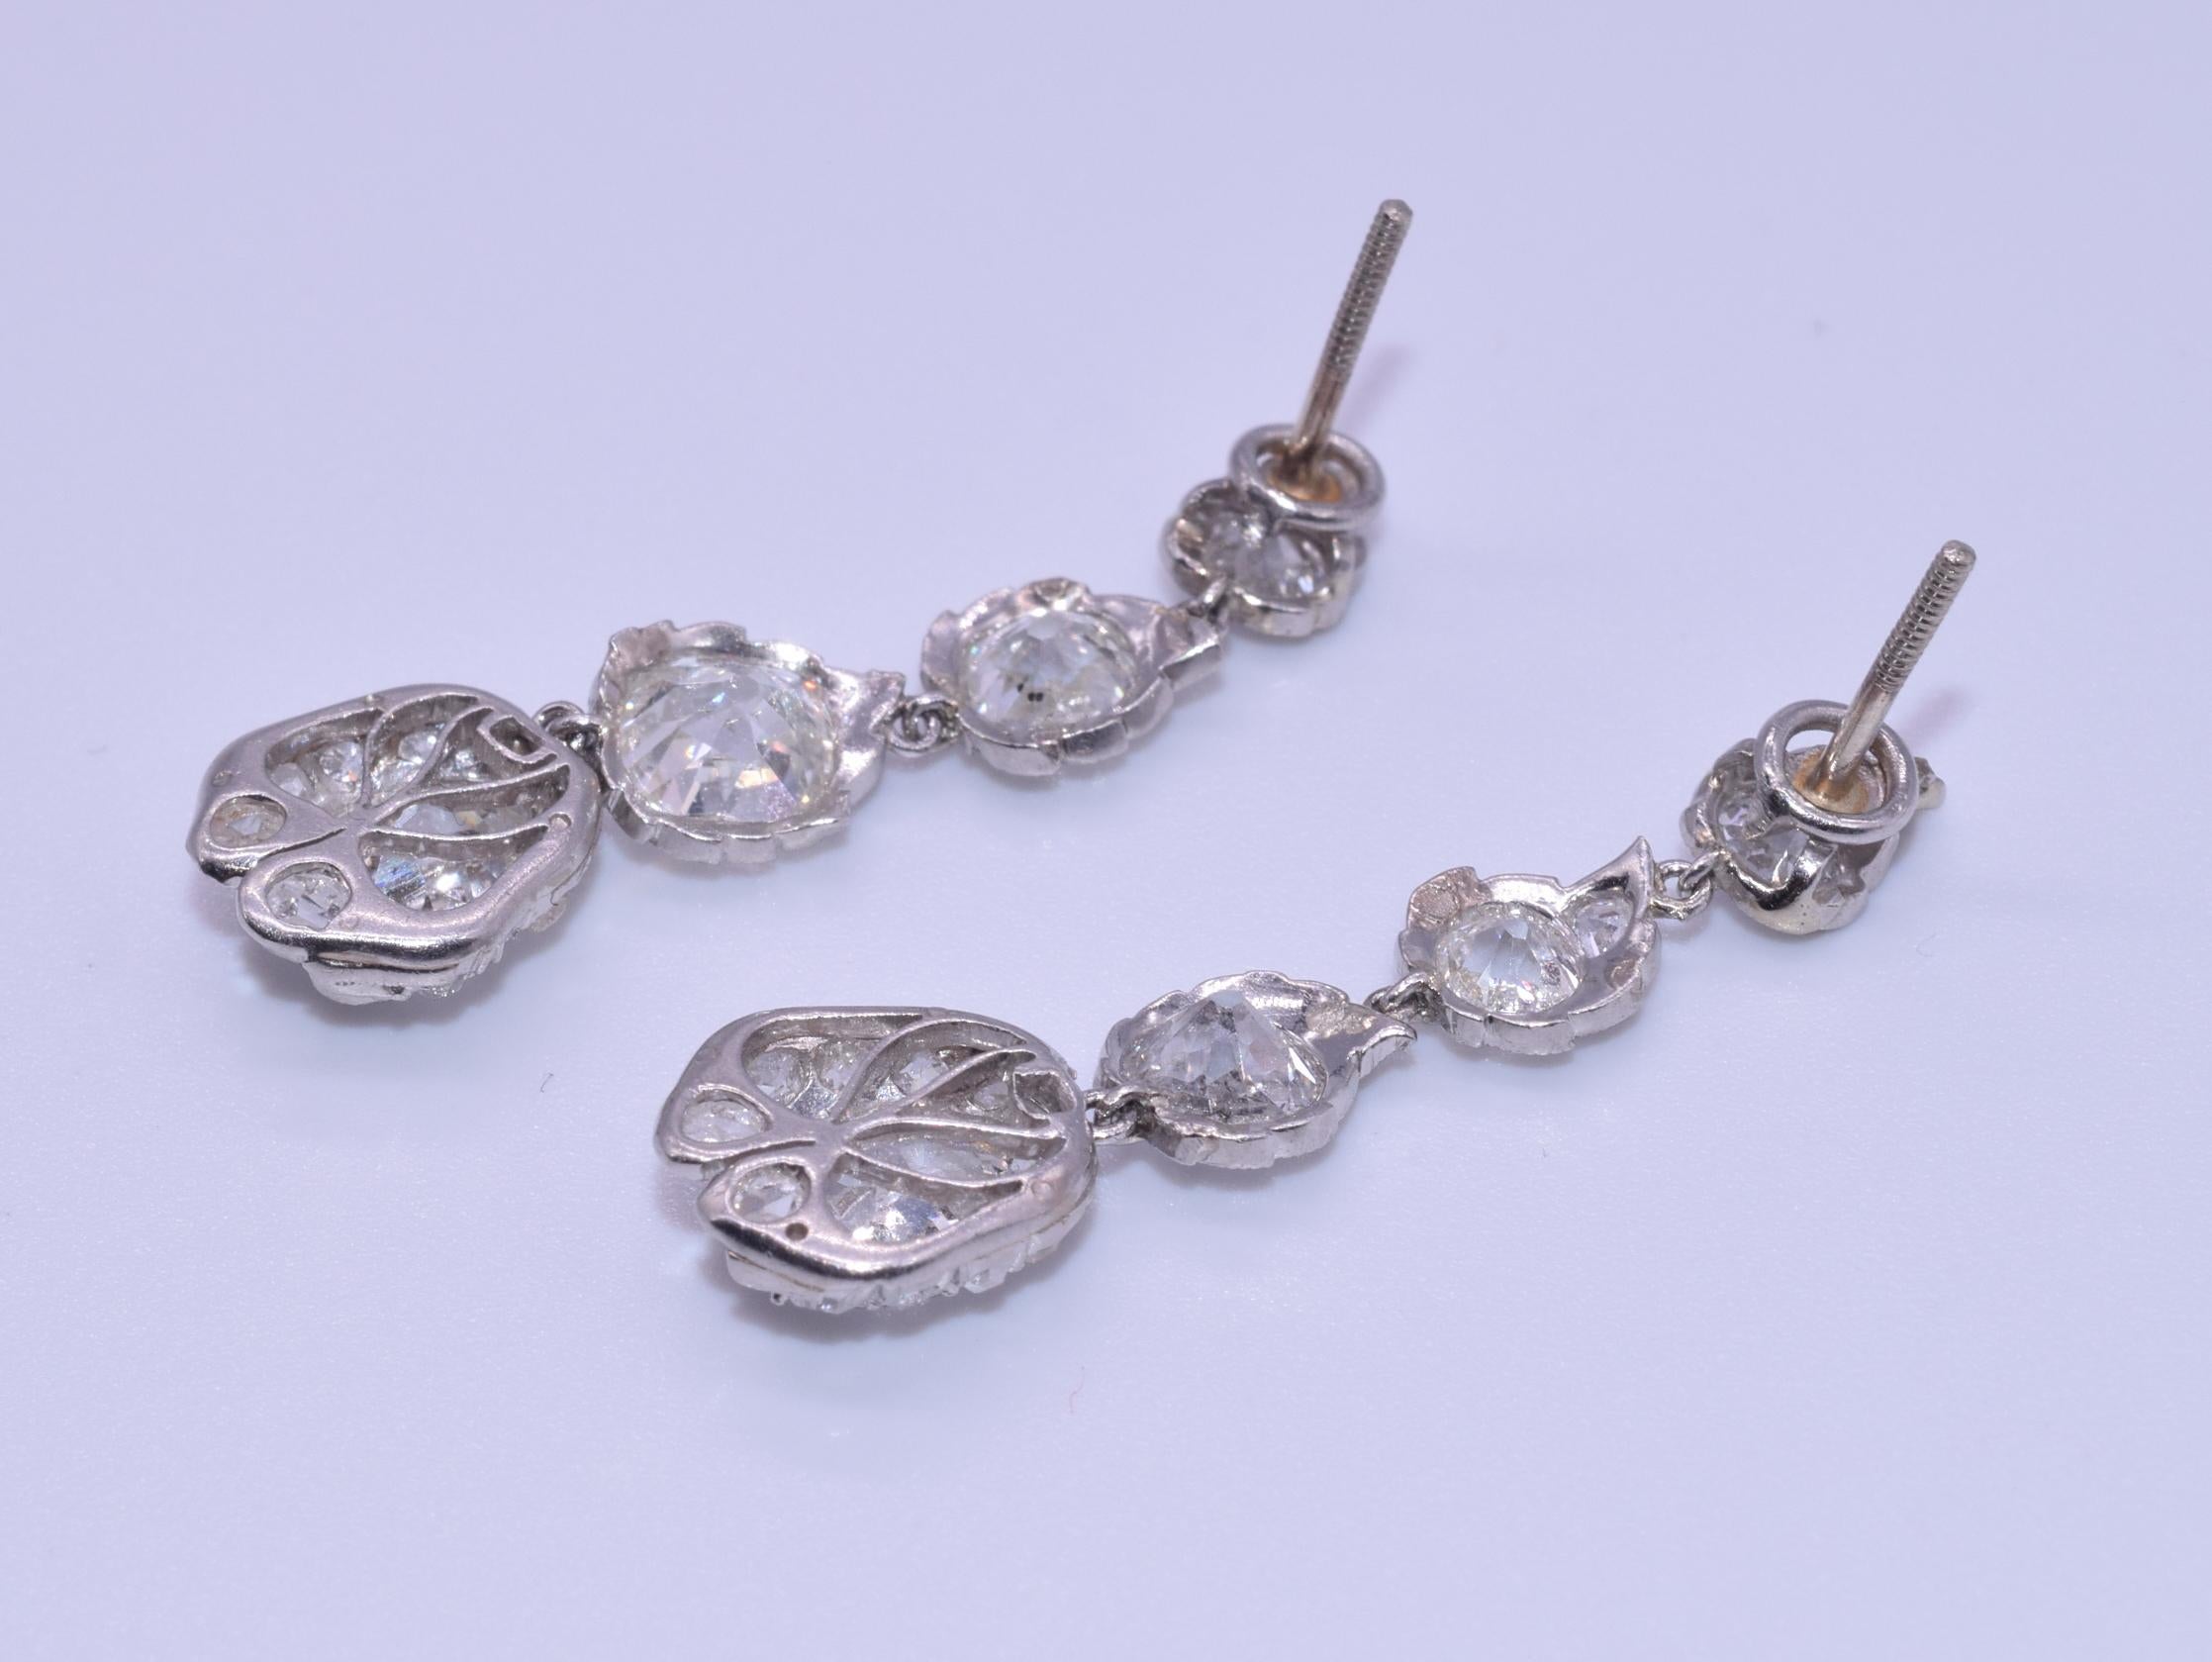 Edwardian Diamond Platinum Stylized Flower Bud Pendant Earrings In Excellent Condition For Sale In New York, NY